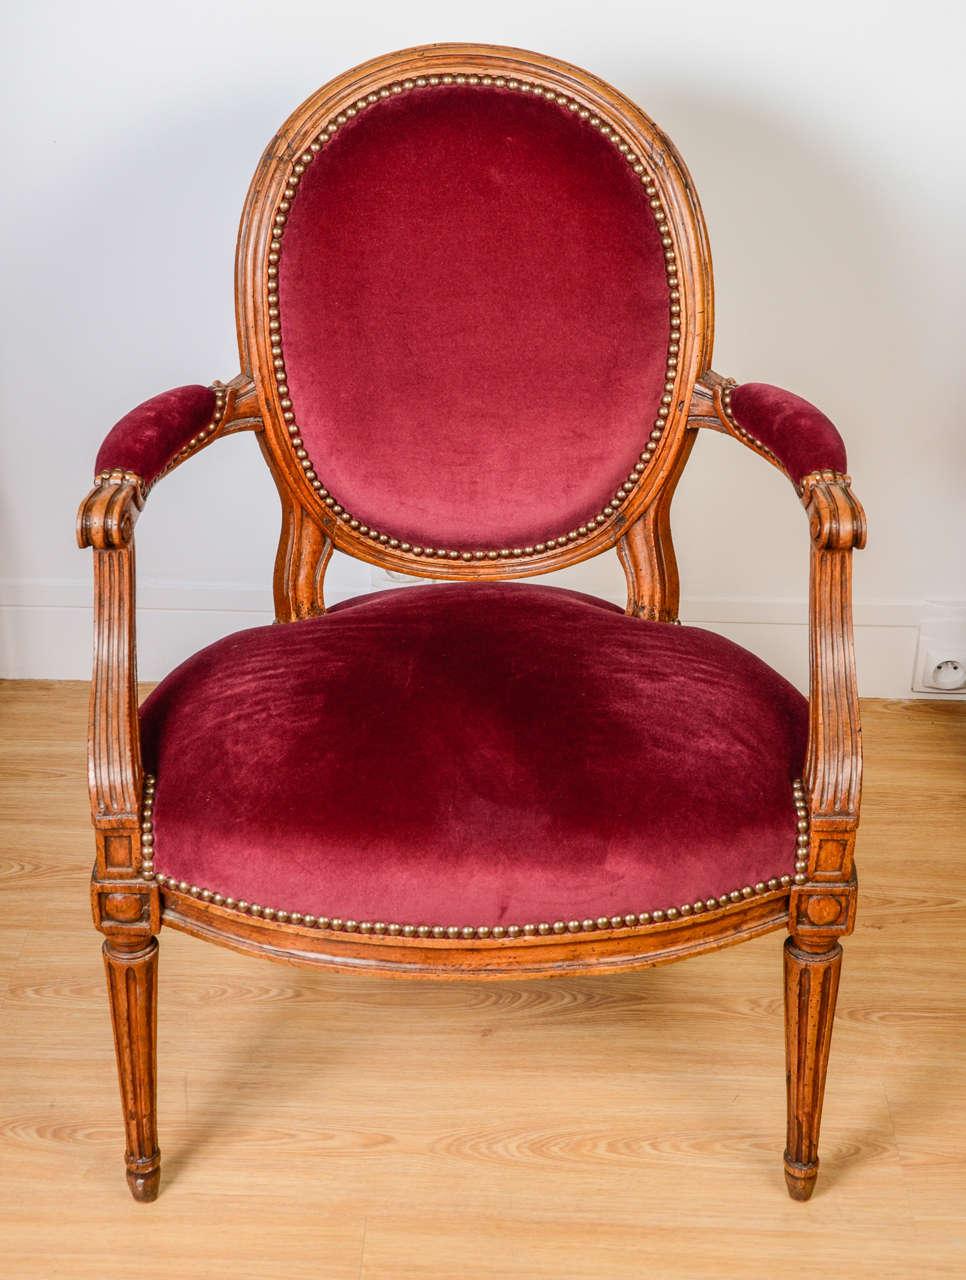 Set of two cabriolet armchairs (can form a pair), one bearing the stamp of Jean-Baptiste-Claude Sene (October 24, 1748 - February 10, 1803), Master in 1769; the other is an almost identical but later model.
Beautiful redone upholstery and burgundy